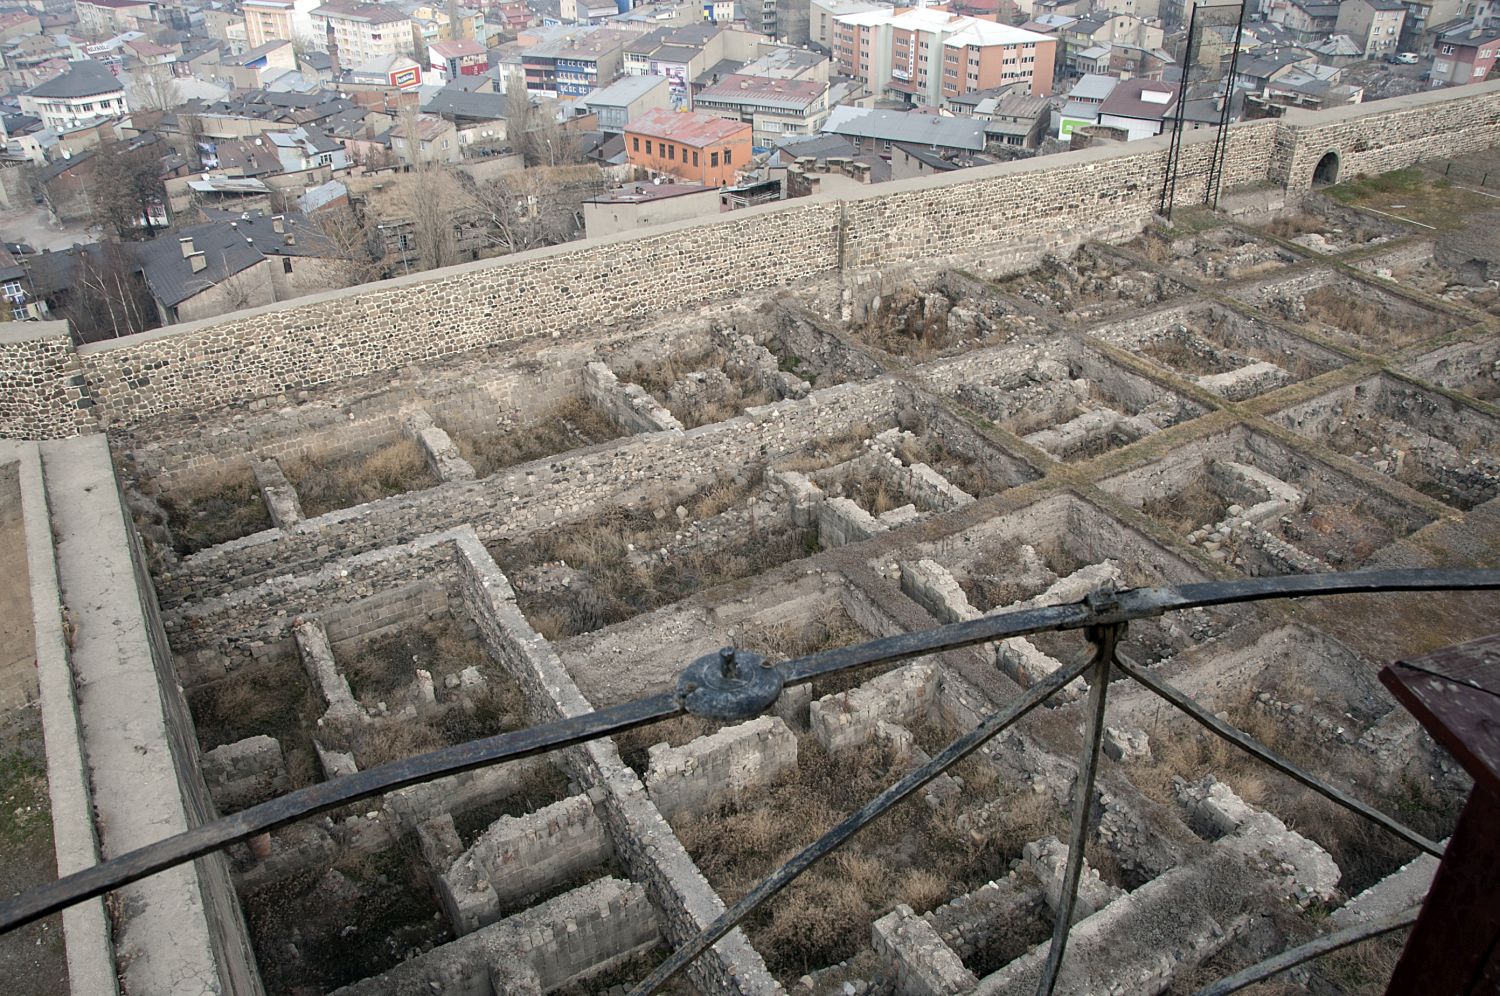 View of foundations of excavated buildings in citadel.